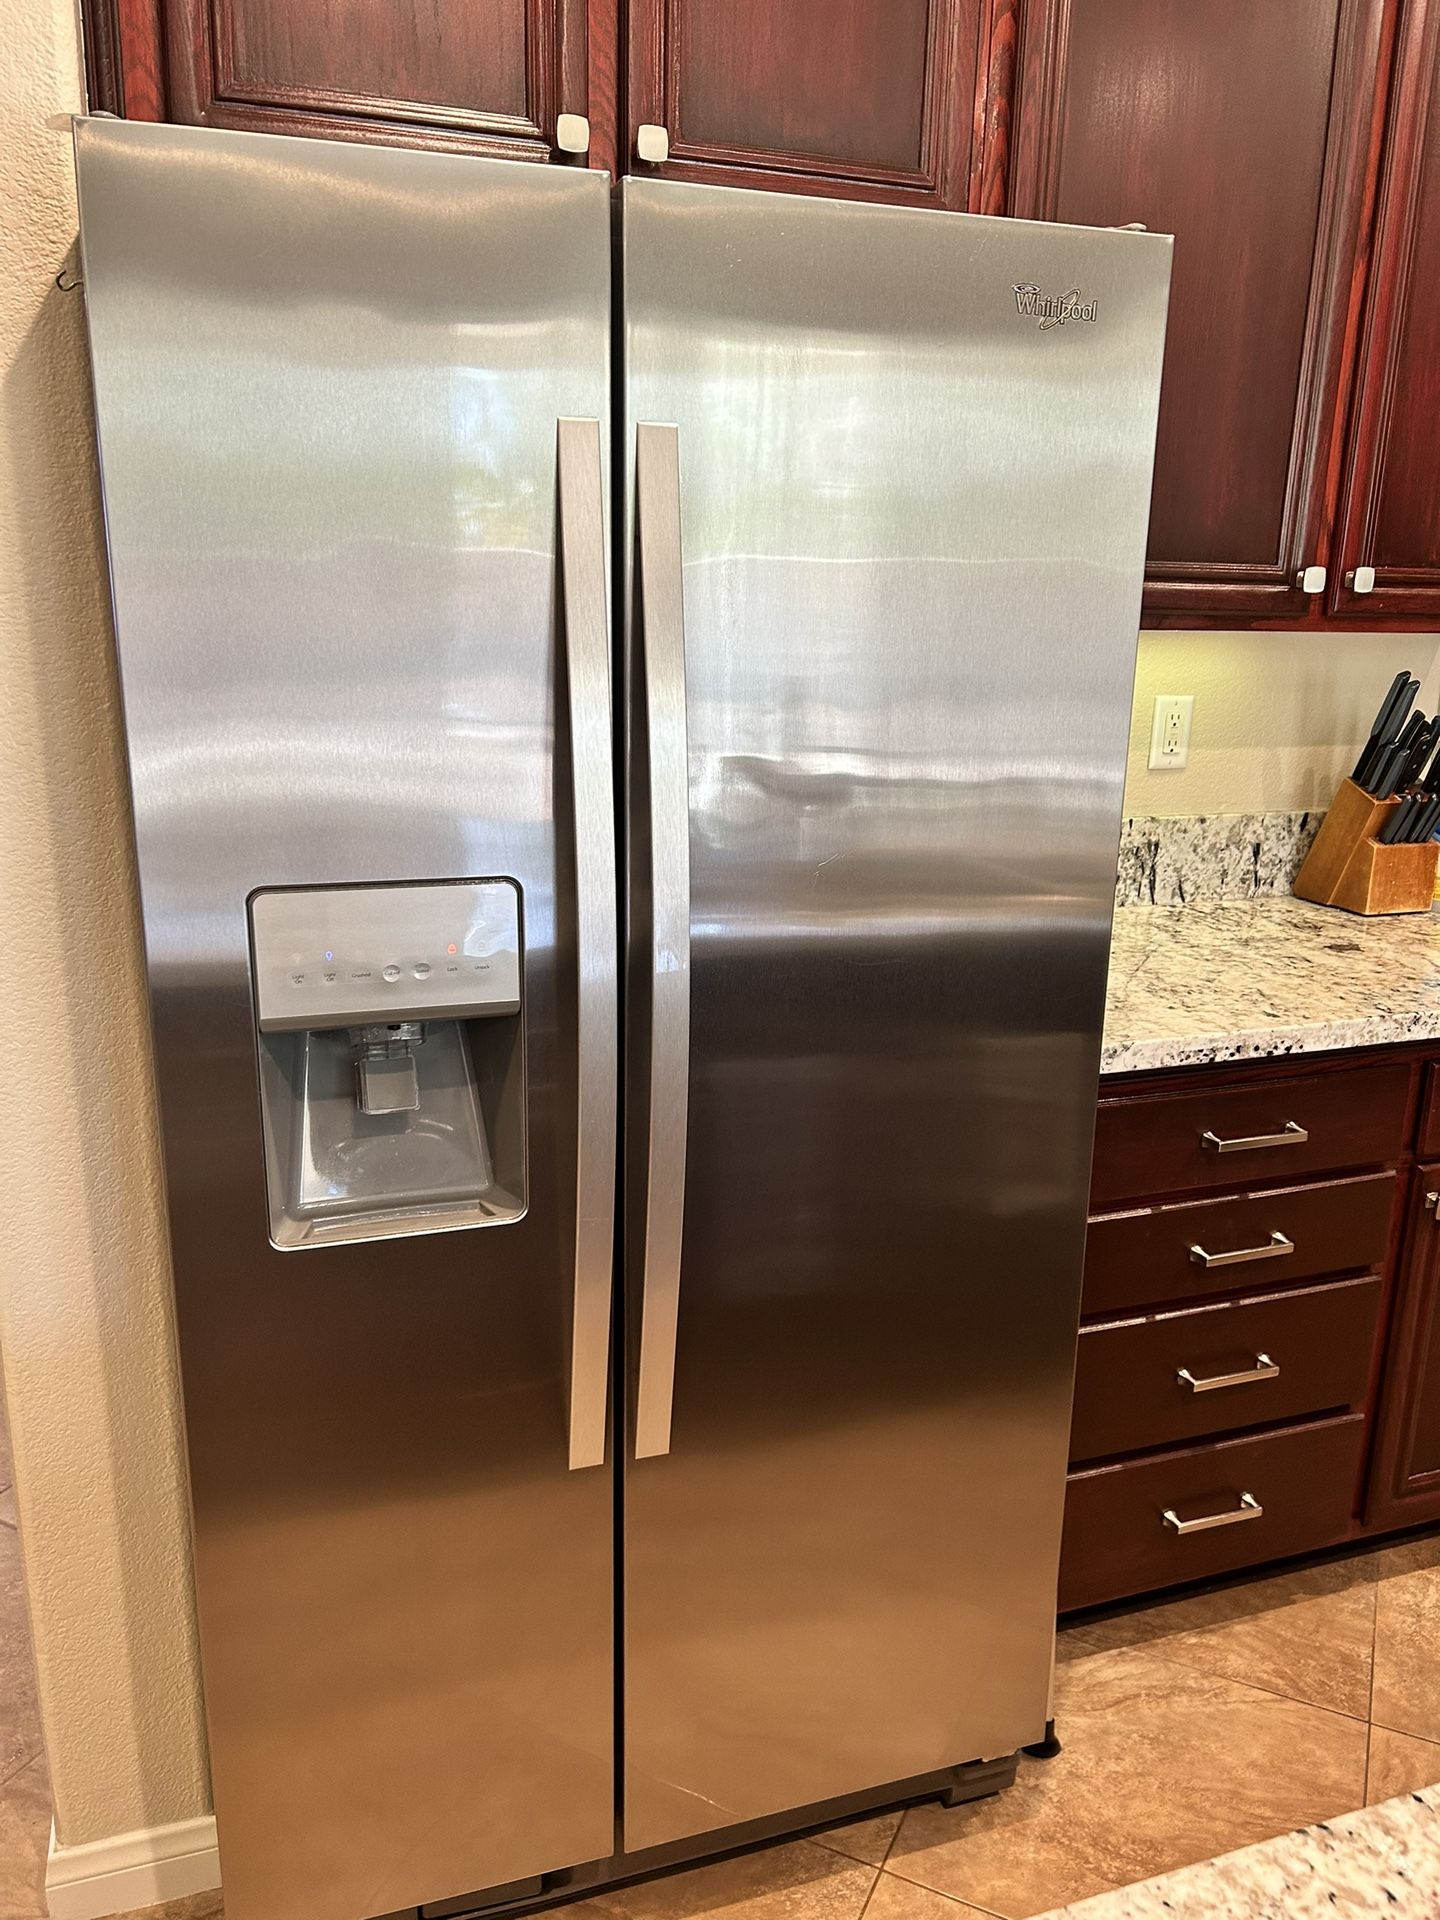 Whirlpool Fridge In Great Working Condition